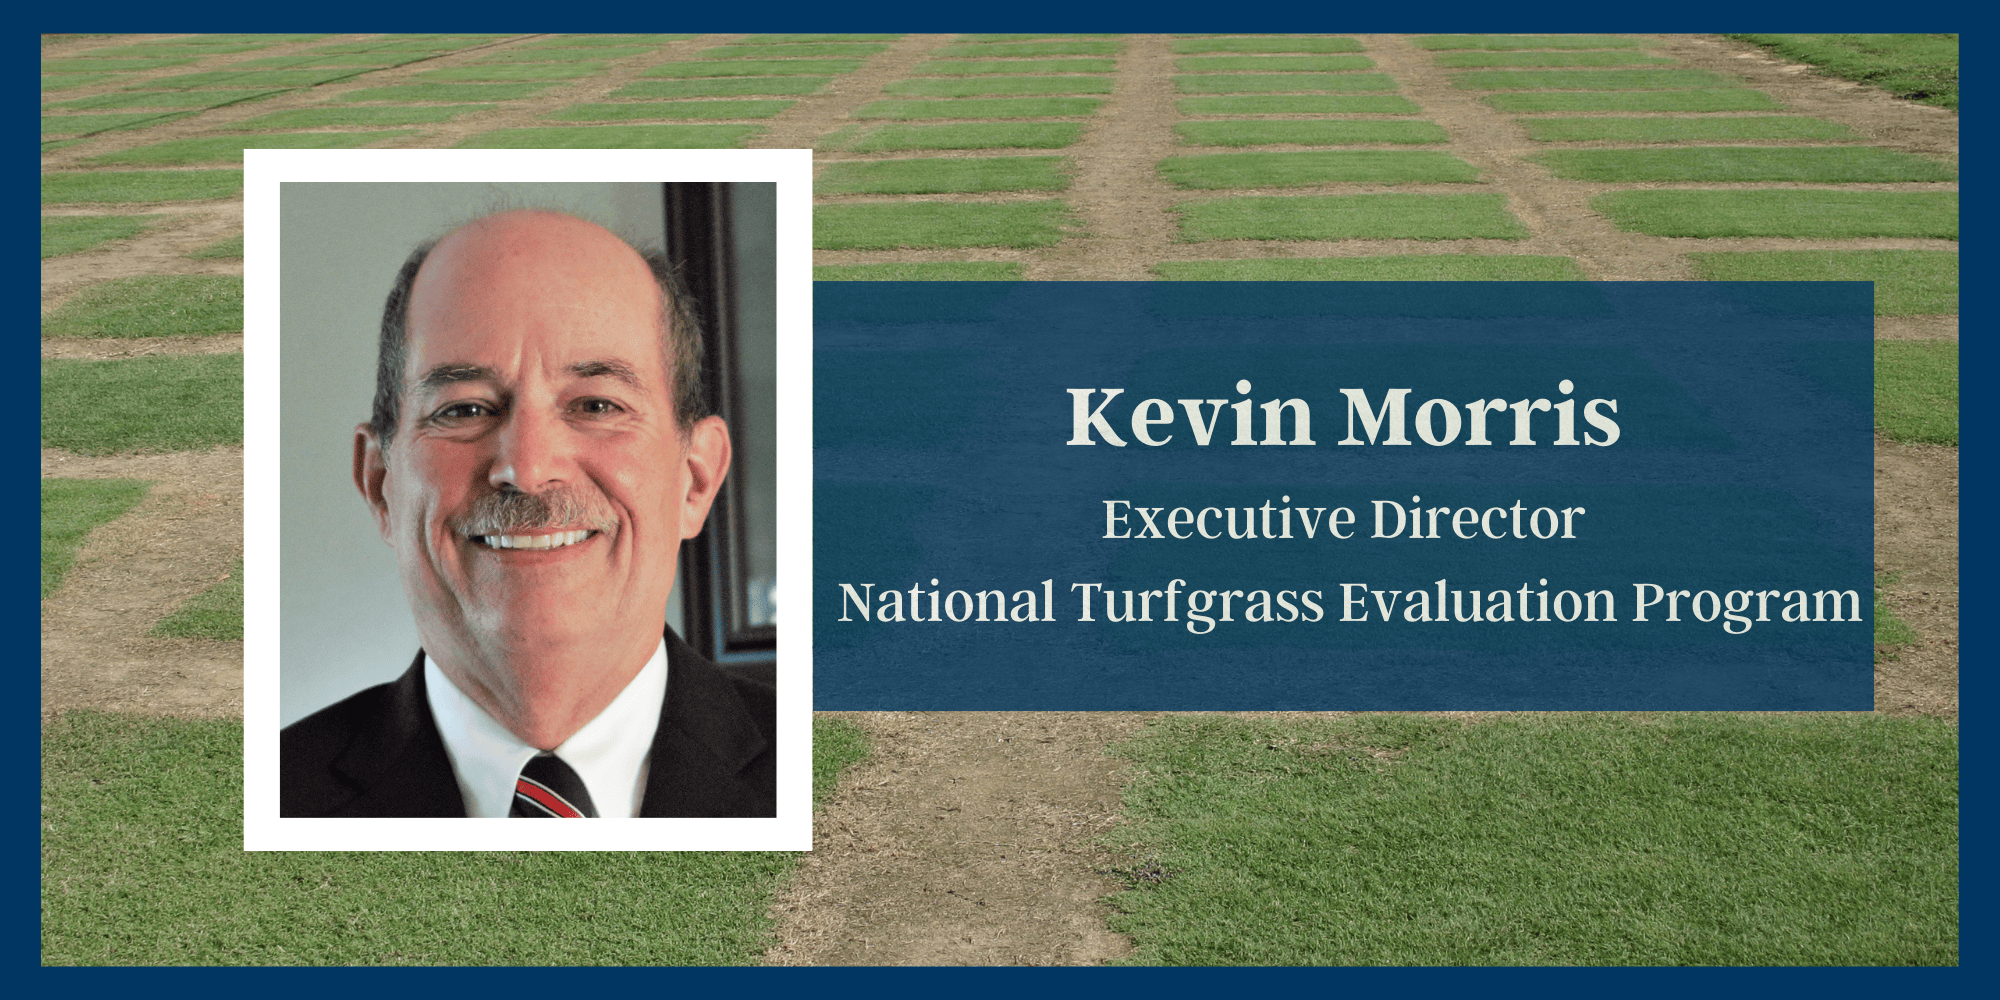 Meet Kevin Morris, the Leader Behind the National Turfgrass Evaluation Program